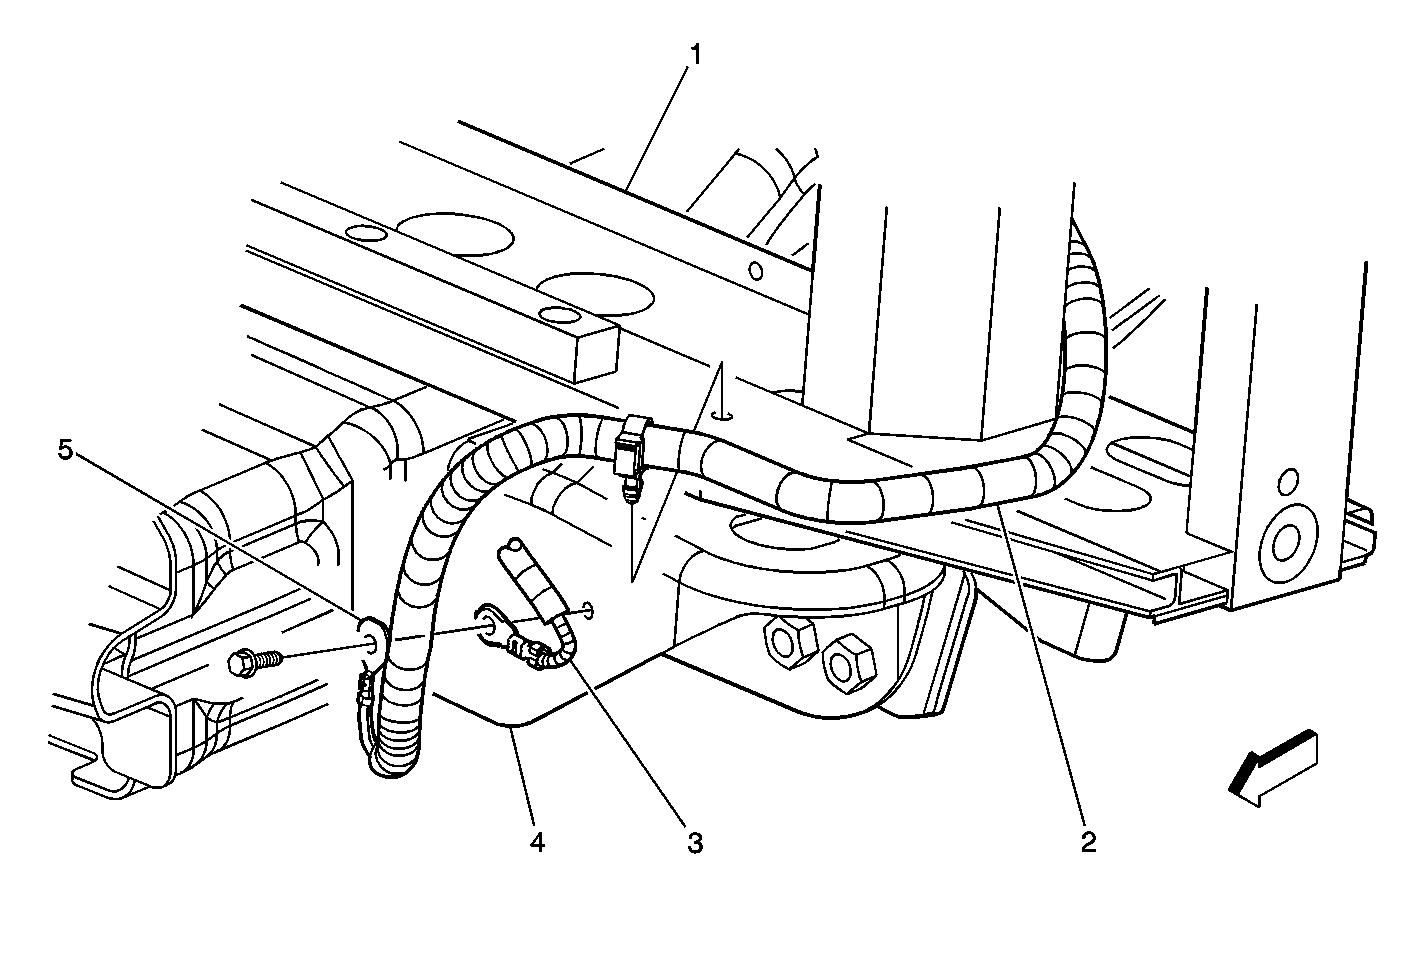 Lower_LF_of_the_Radiator_Support_Components.JPG